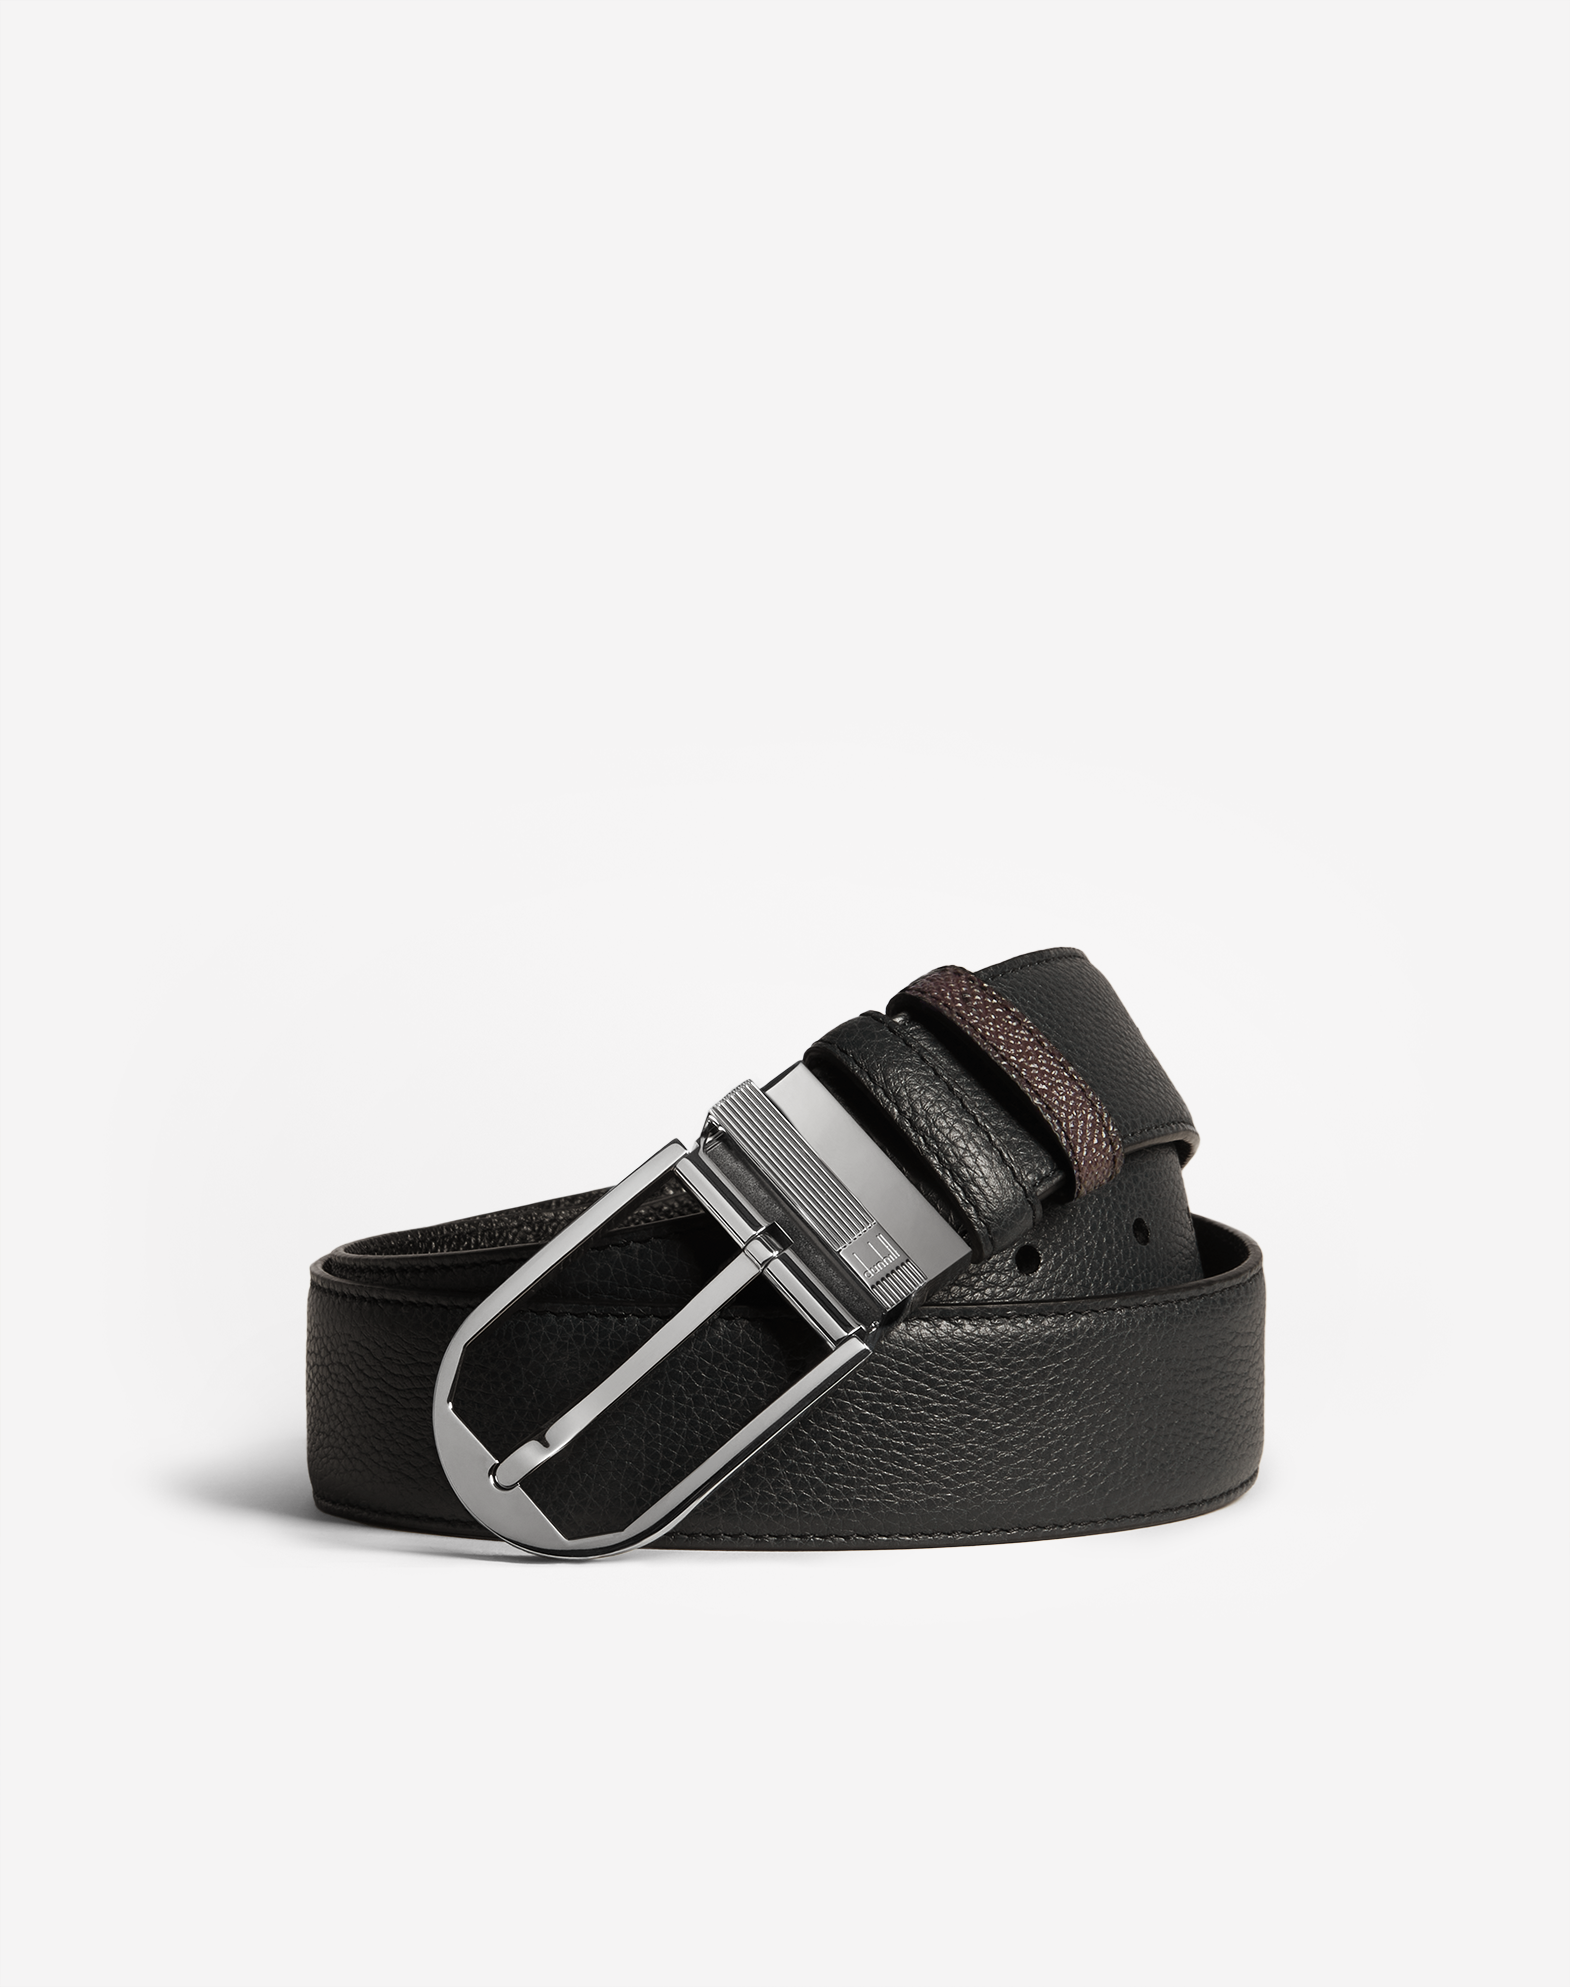 Dunhill Reversible 35mm Saddle Buckle Grained Leather Belt In Black